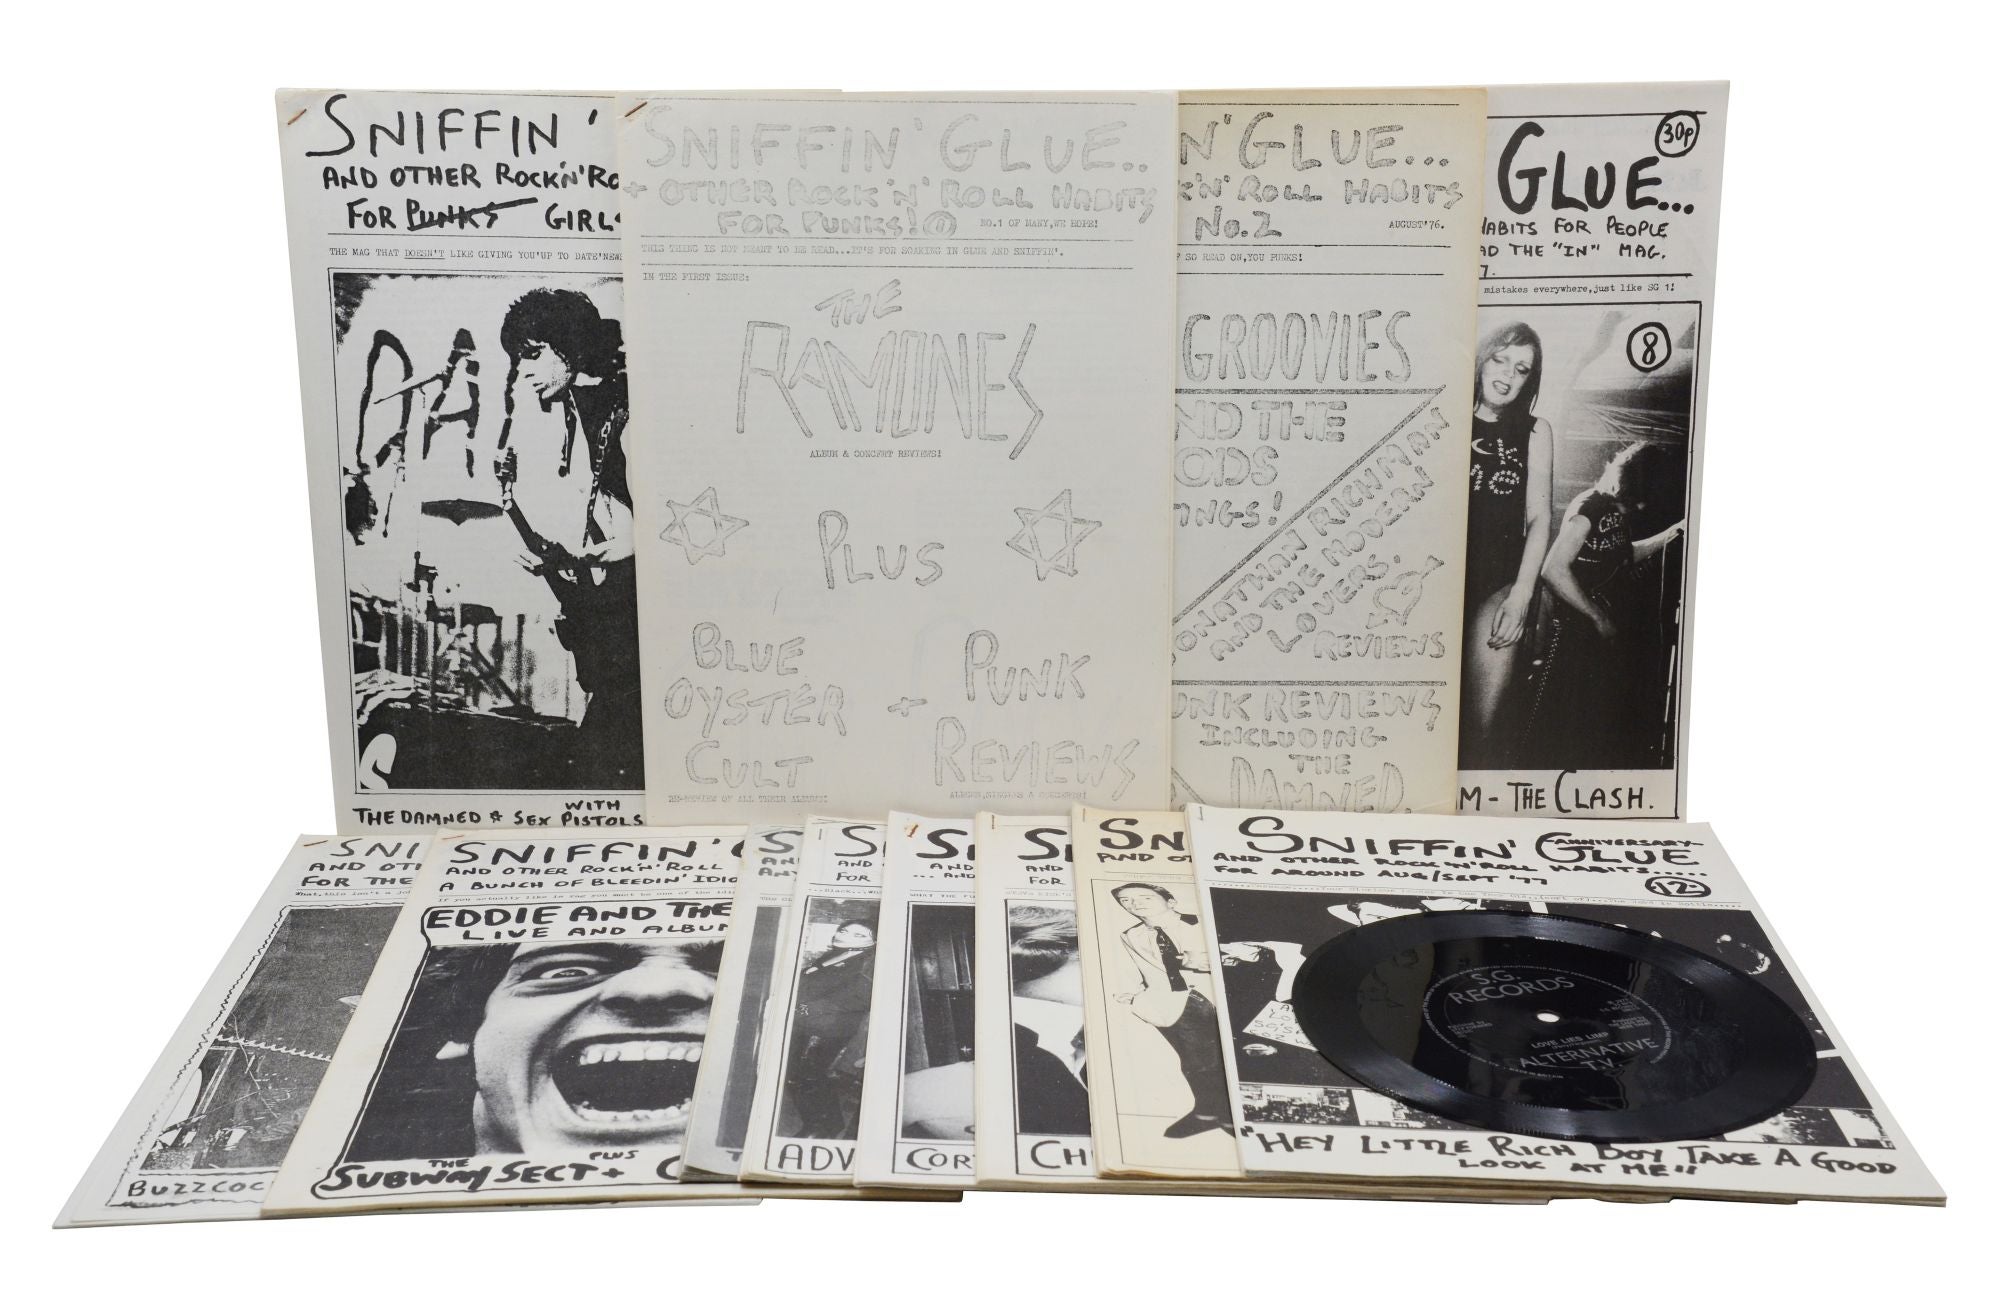 SNIFFIN' GLUE and Other Rock 'n' Roll Habits Volumes 1 through